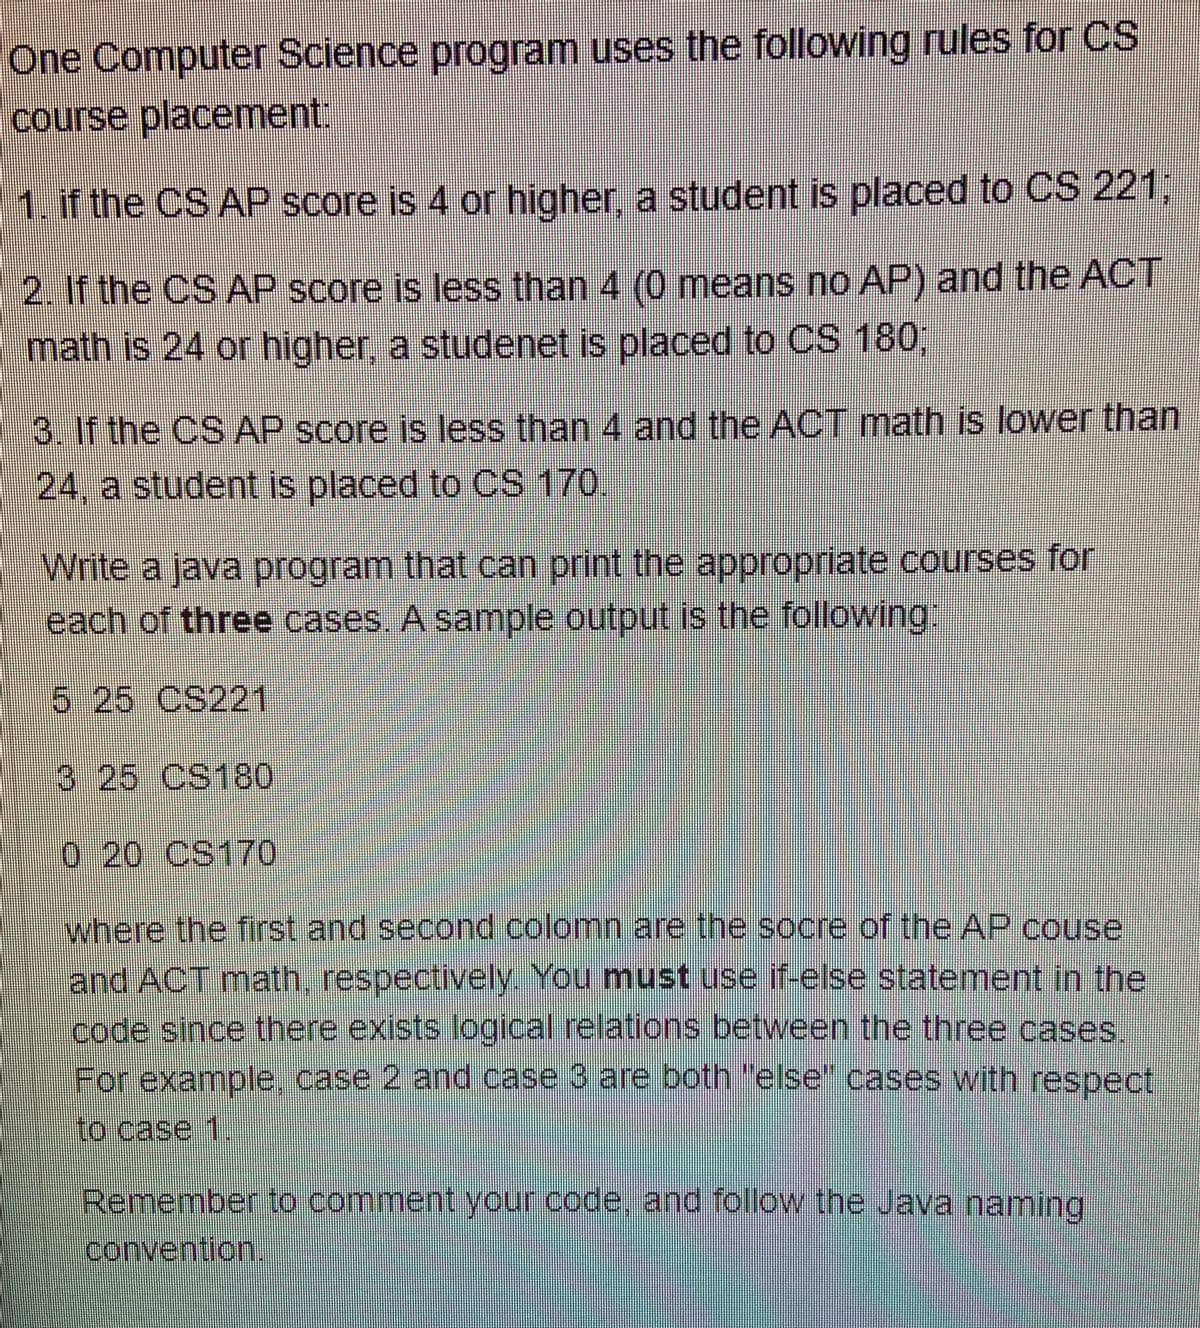 One Computer Science program uses the following rules for CS
course placement:
1. if the CS AP score is 4 or higher, a student is placed to CS 221,
2. If the CS AP score is less than 4 (0 means no AP) and the ACT
math is 24 or higher, a studenet is placed to CS 180,
3. If the CS AP score is less than 4 and the ACT math is lower than
24, a student is placed to CS 170.
Write a java program that can print the appropriate courses for
each of three cases. A sample output is the following
525 CS221
325 CS180
0 20 CS170
where the first and second colomn are the socre of the AP couse
and ACT math, respectively. You must use if-else statement in the
code since there exists logical relations between the three cases
For example, case 2 and case 3 are both "else" cases with respect
to case 1
Remember to comment your code, and follow the Java naming
convention.
